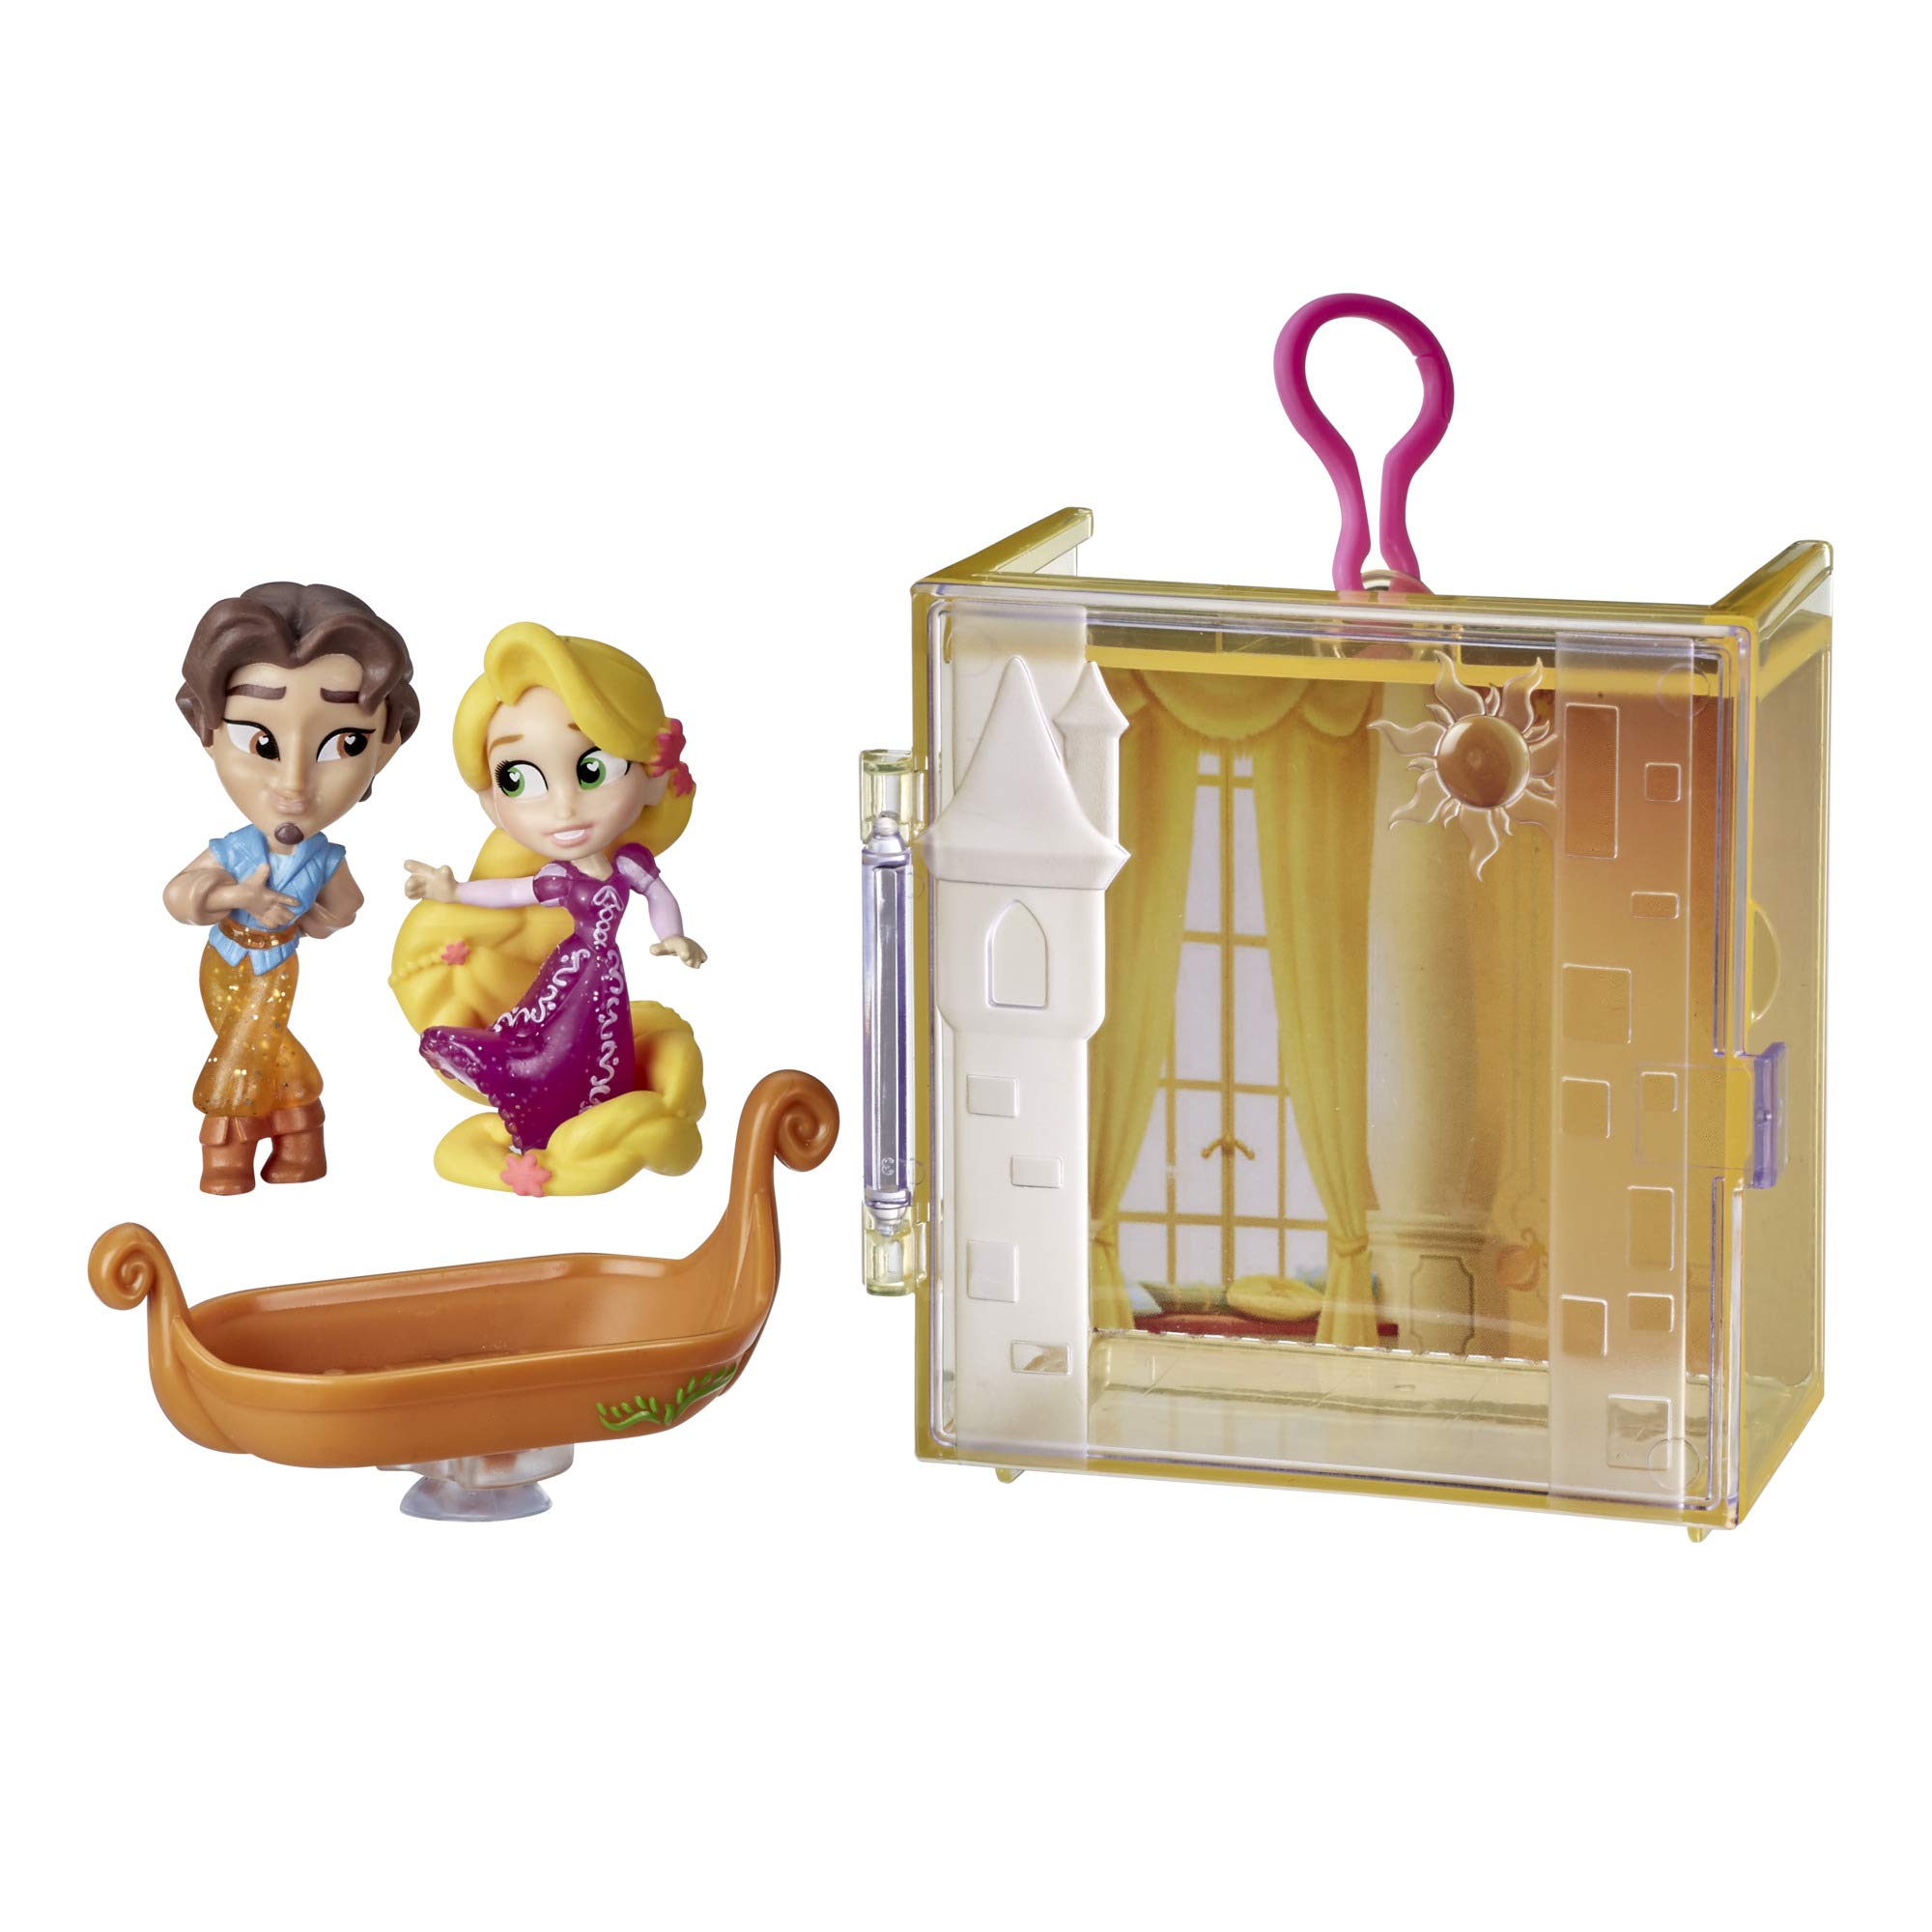 Disney Princess Perfect Pairs Rapunzel, Fun Tangled Unboxing Toy with 2 Dolls, Display Case and Boat Stand, for Kids 3 Years and Up